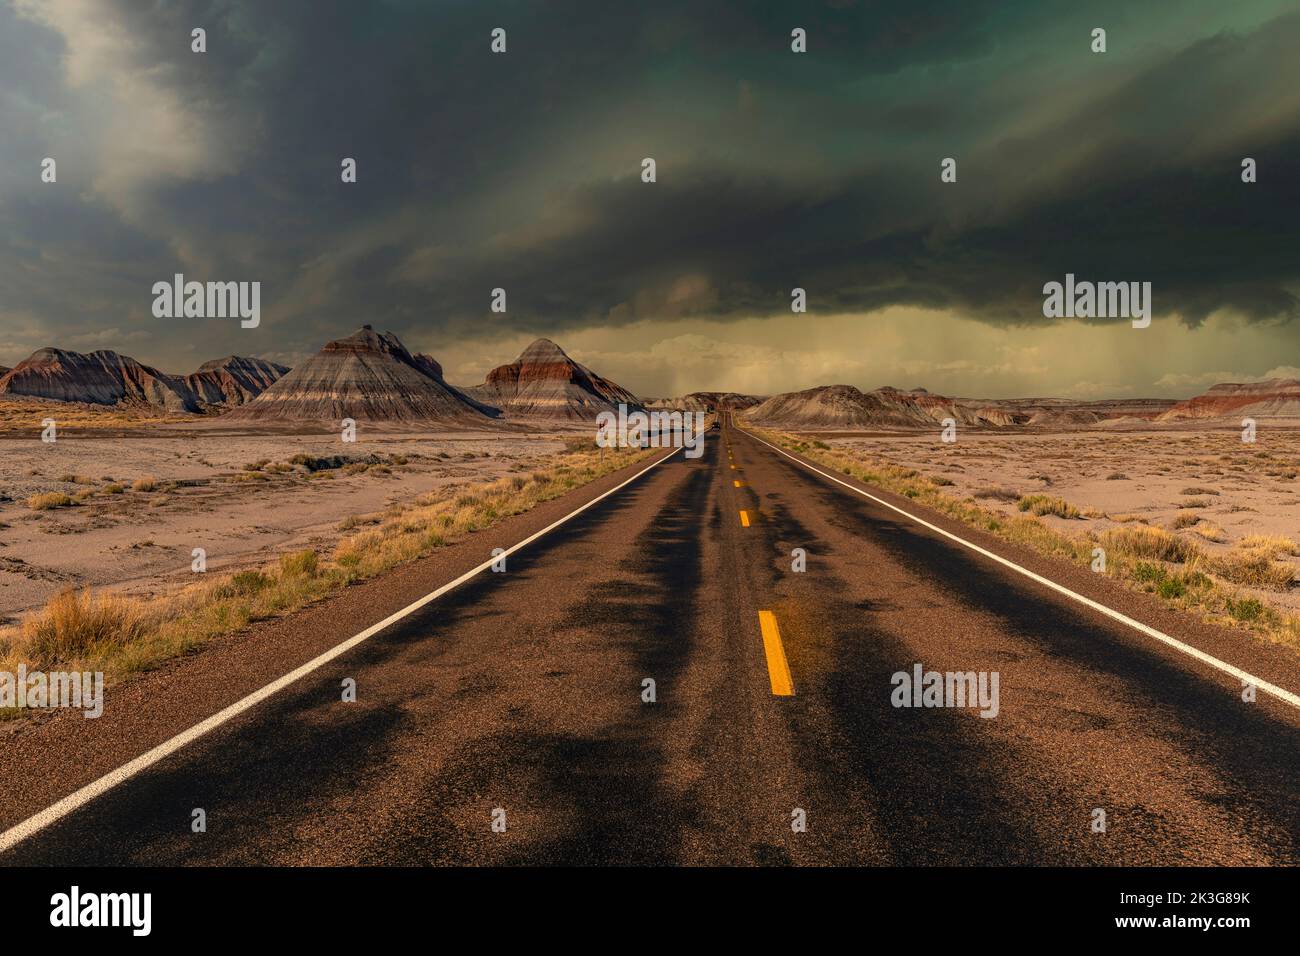 The remote roadway deep in the heart of the Petrified Forest National Park shows the beautiful mountain scenery of the painted desert during a storm. Stock Photo